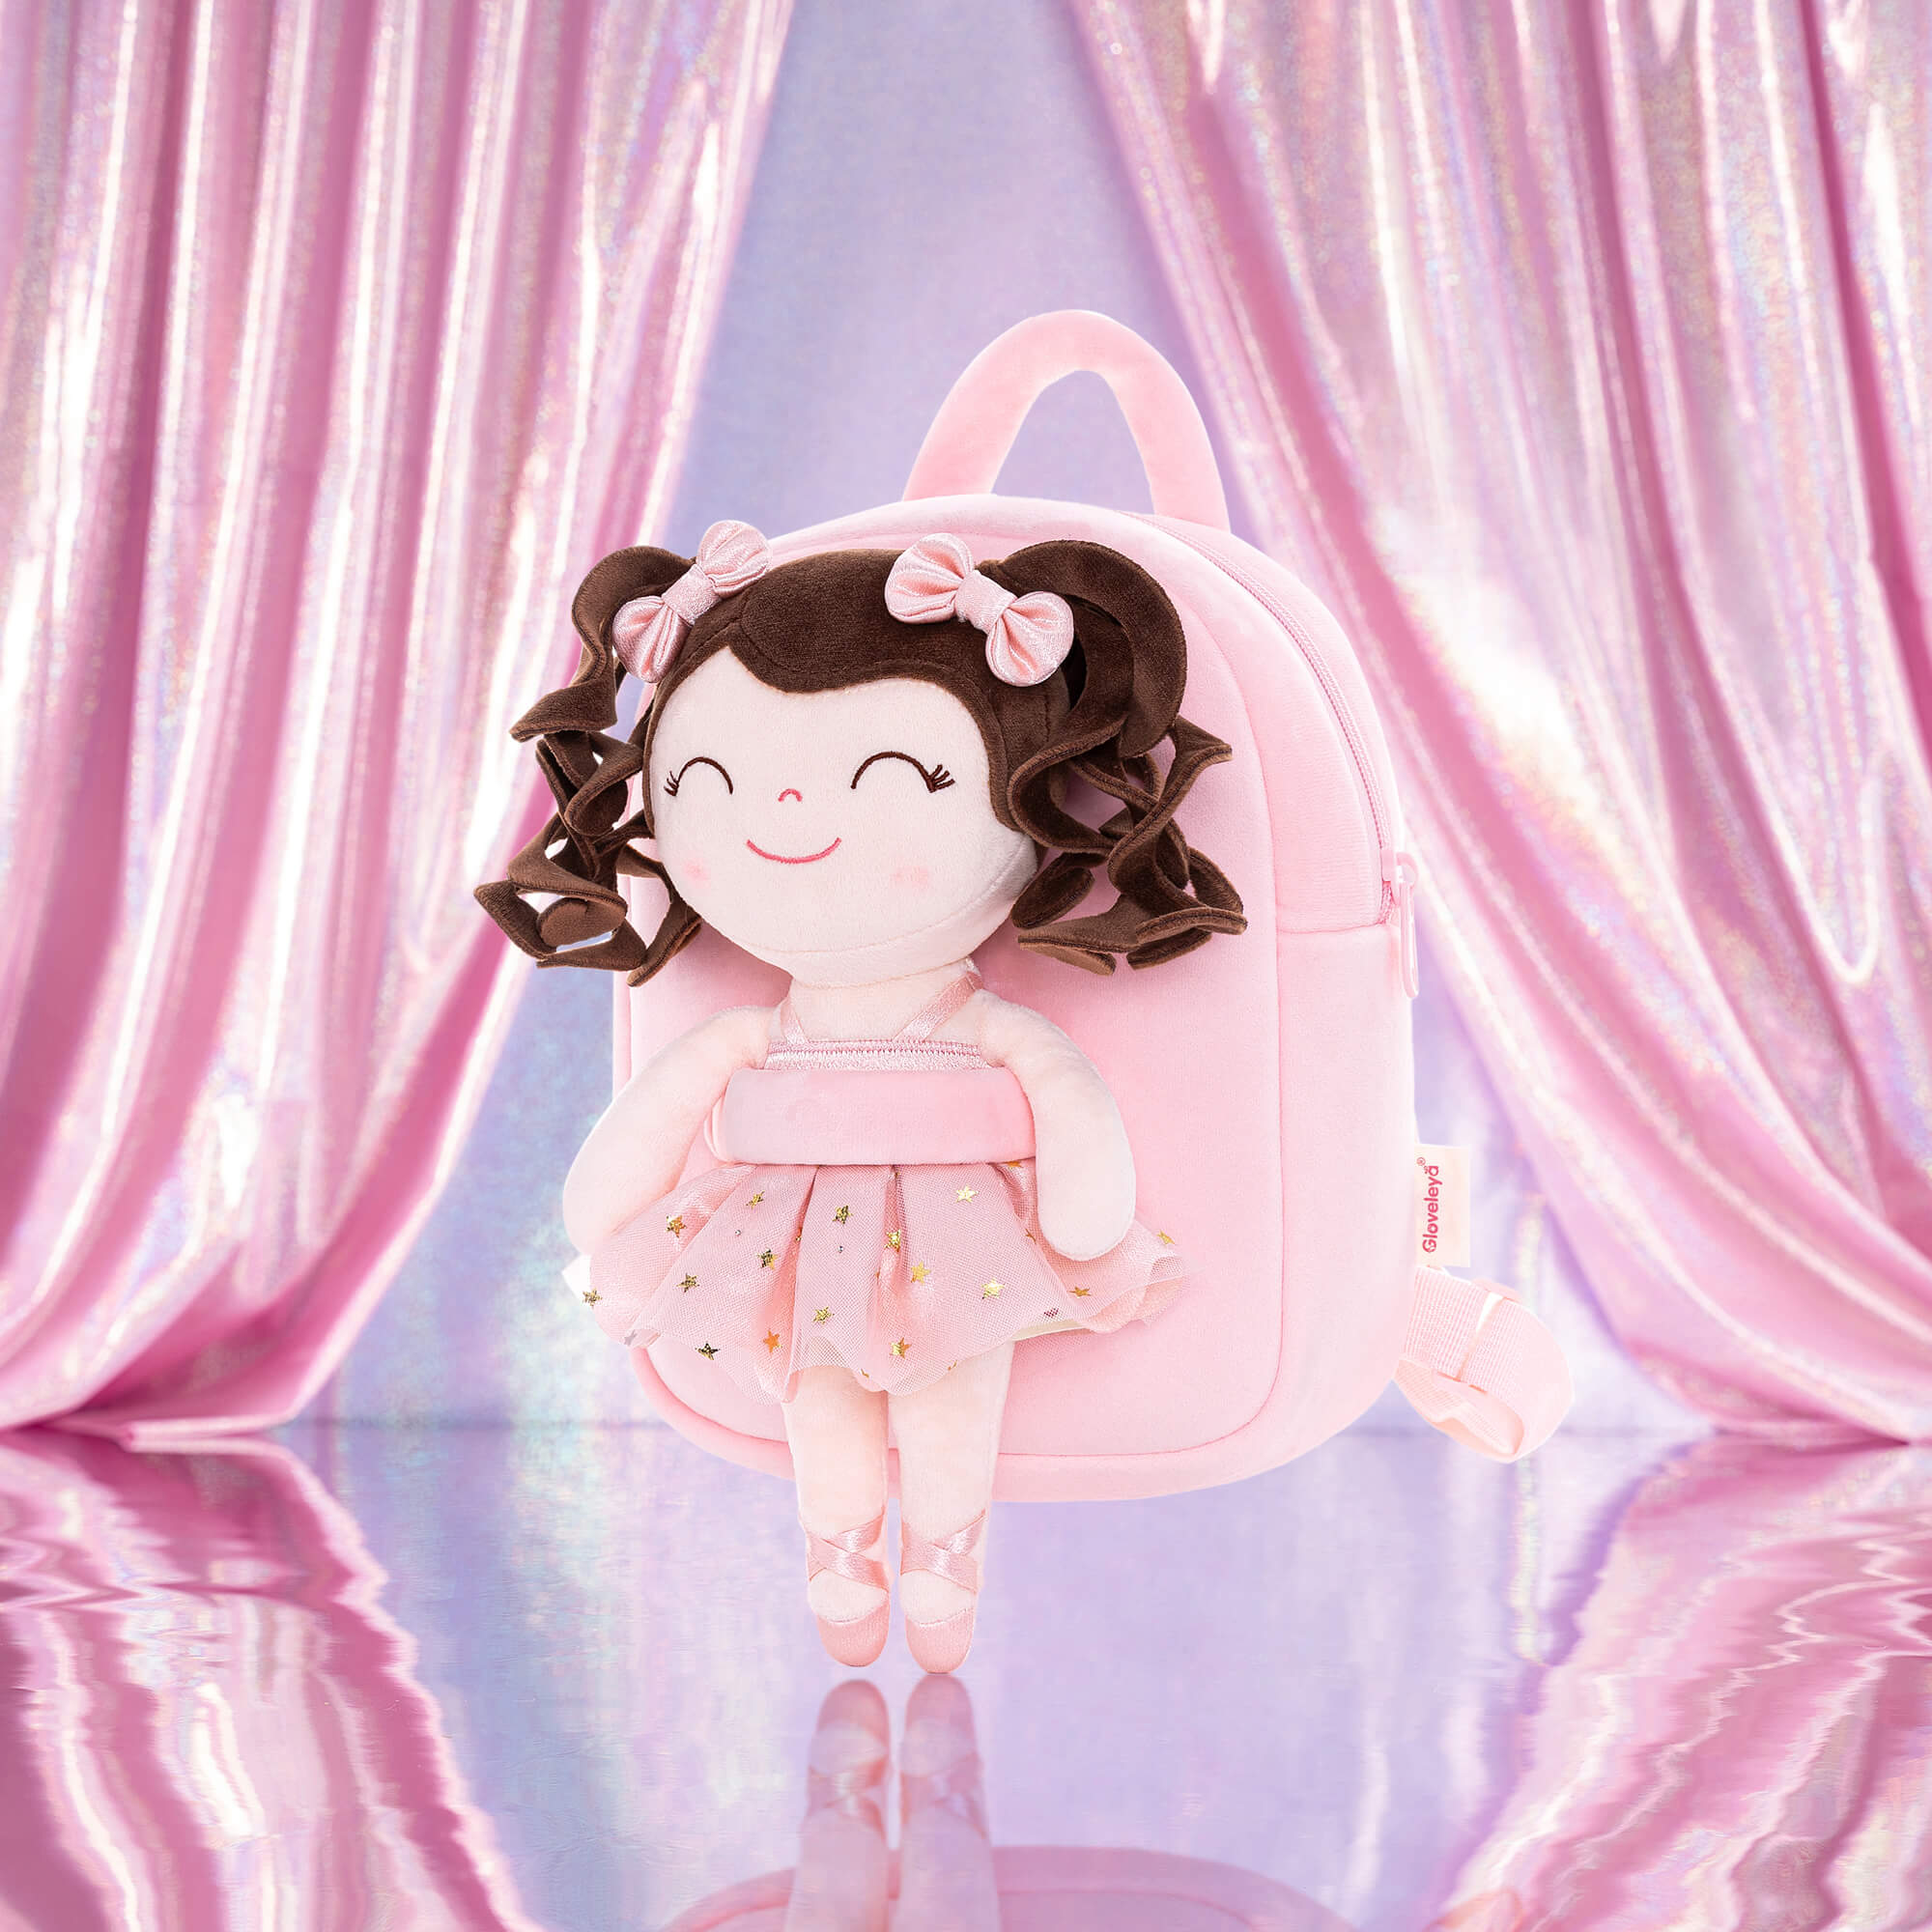 Gloveleya 9-inch Personalized Plush Curly Ballet Girl Dolls Backpack Champagne Pink Ballet Dream